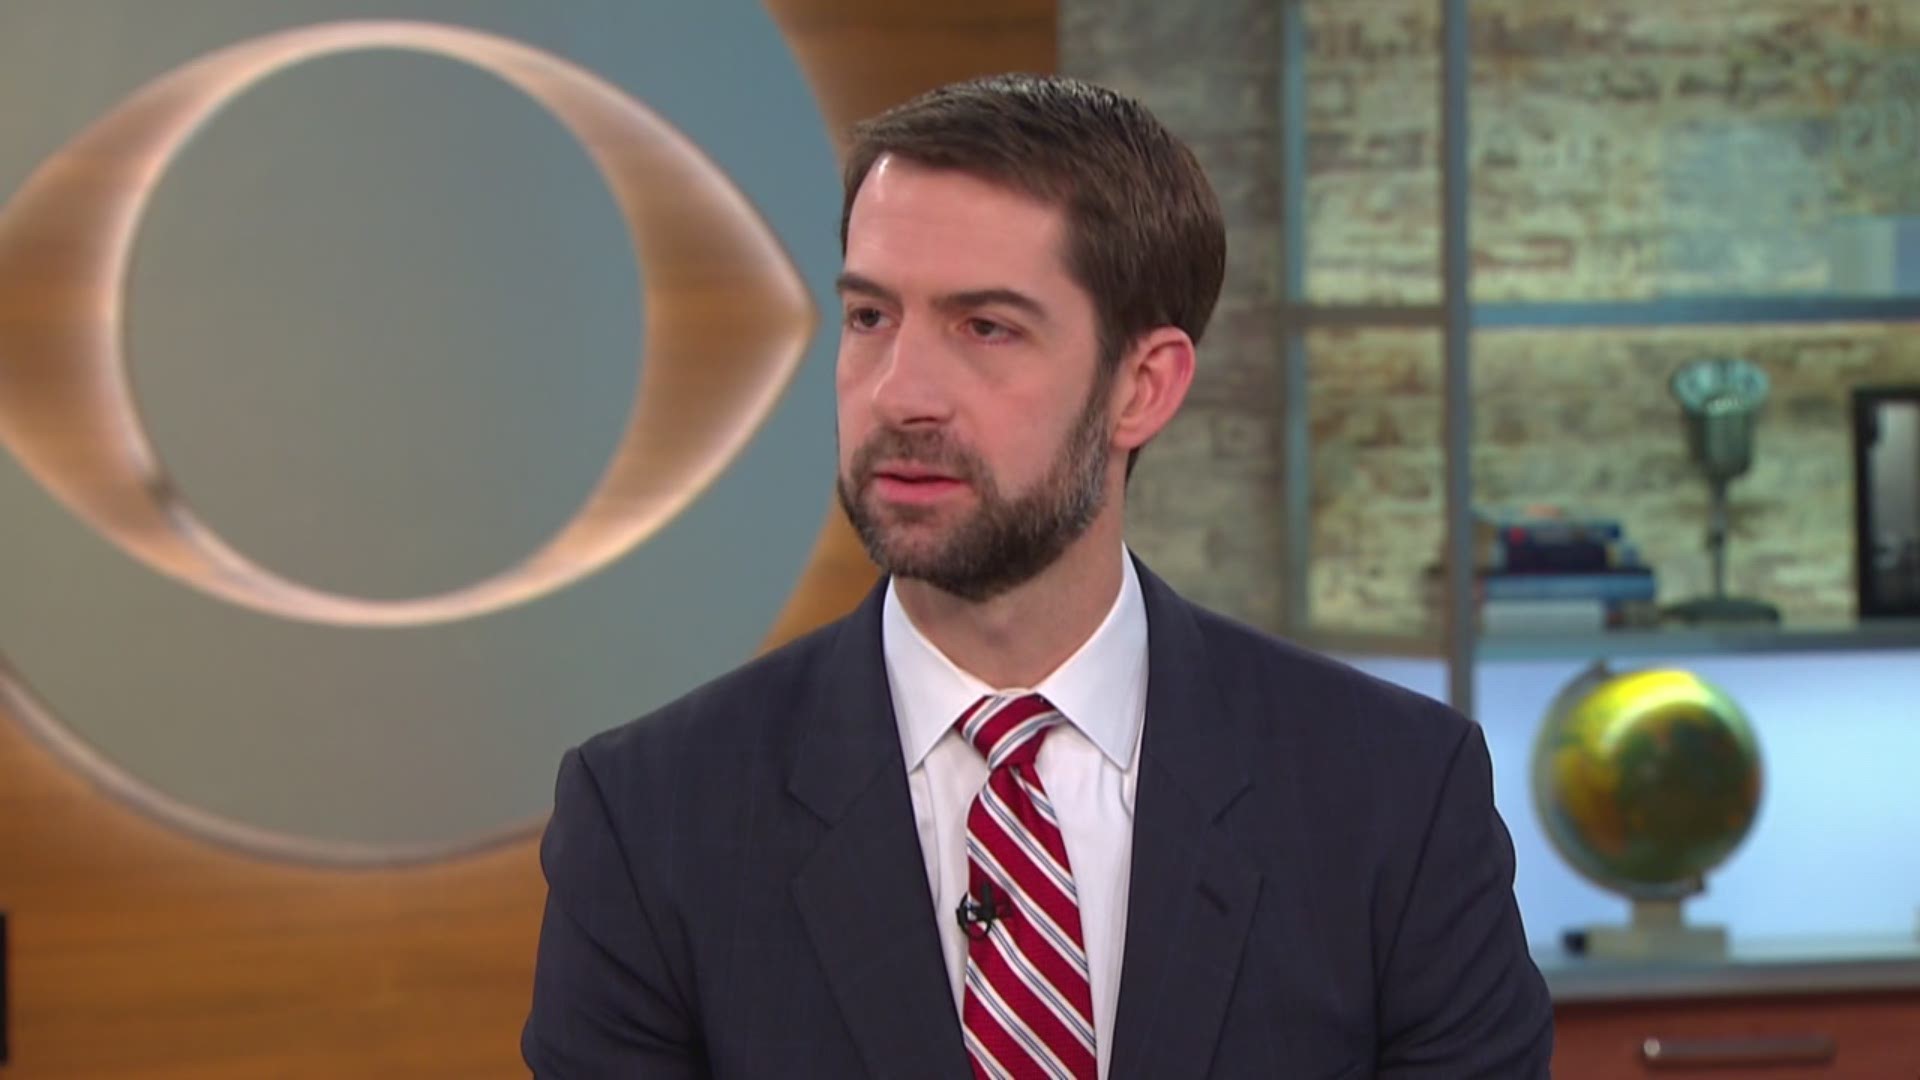 Arkansas Senator Tom Cotton discussed with CBS the angry constituents he faced at an Arkansas town hall who pressed him this week about Obamacare, President Trump's proposed border wall and Mr. Trump's tax returns.